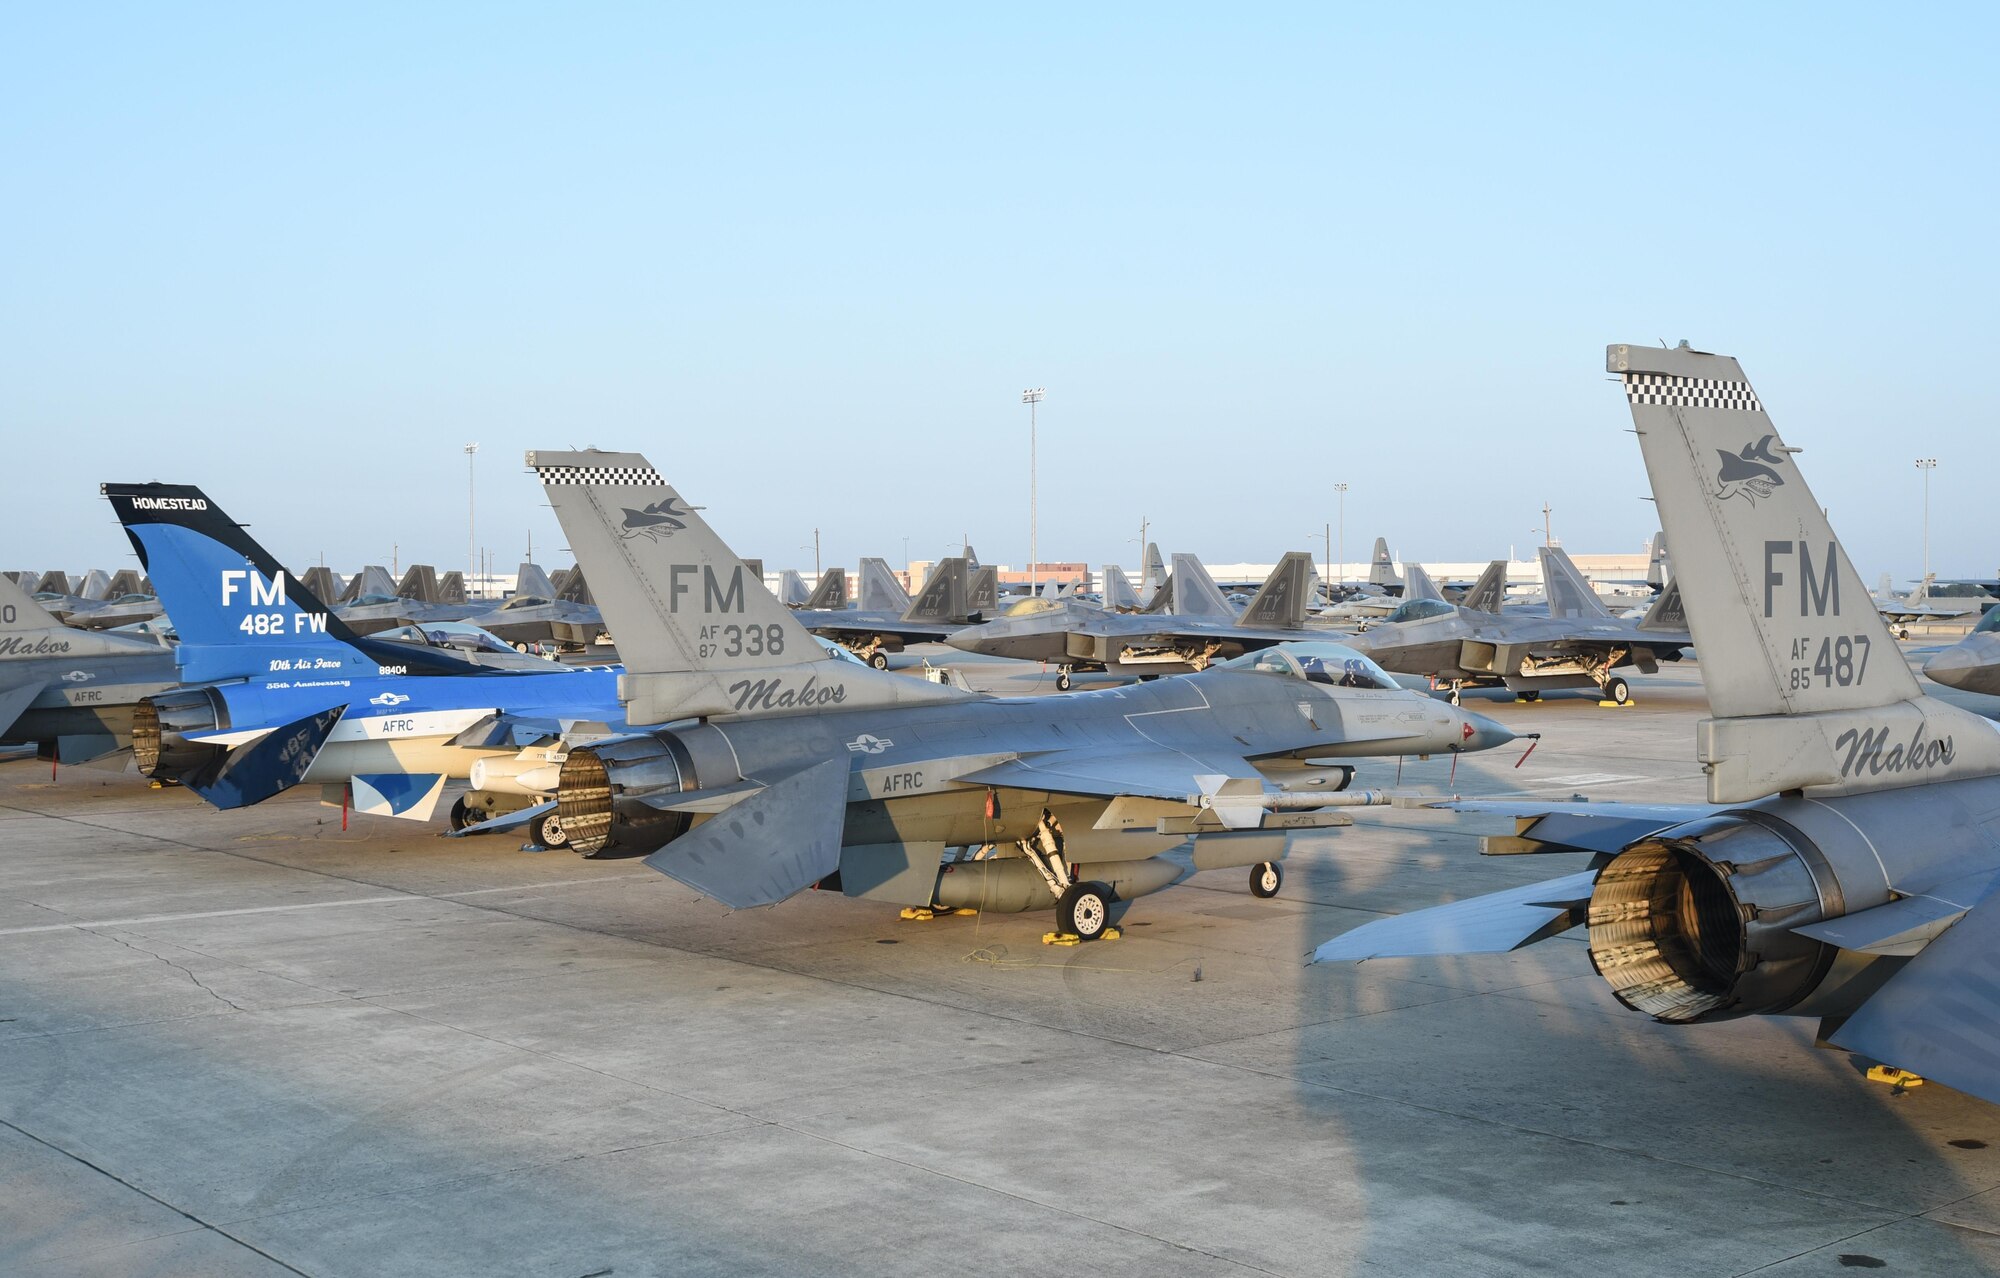 Aircraft from the 482nd Fighter Wing at Homestead Air Reserve Base, Florida, relocated to Naval Air Station Fort Worth Joint Reserve Base, Texas, ahead of Hurricane Irma to avoid damage from Hurricane Irma.